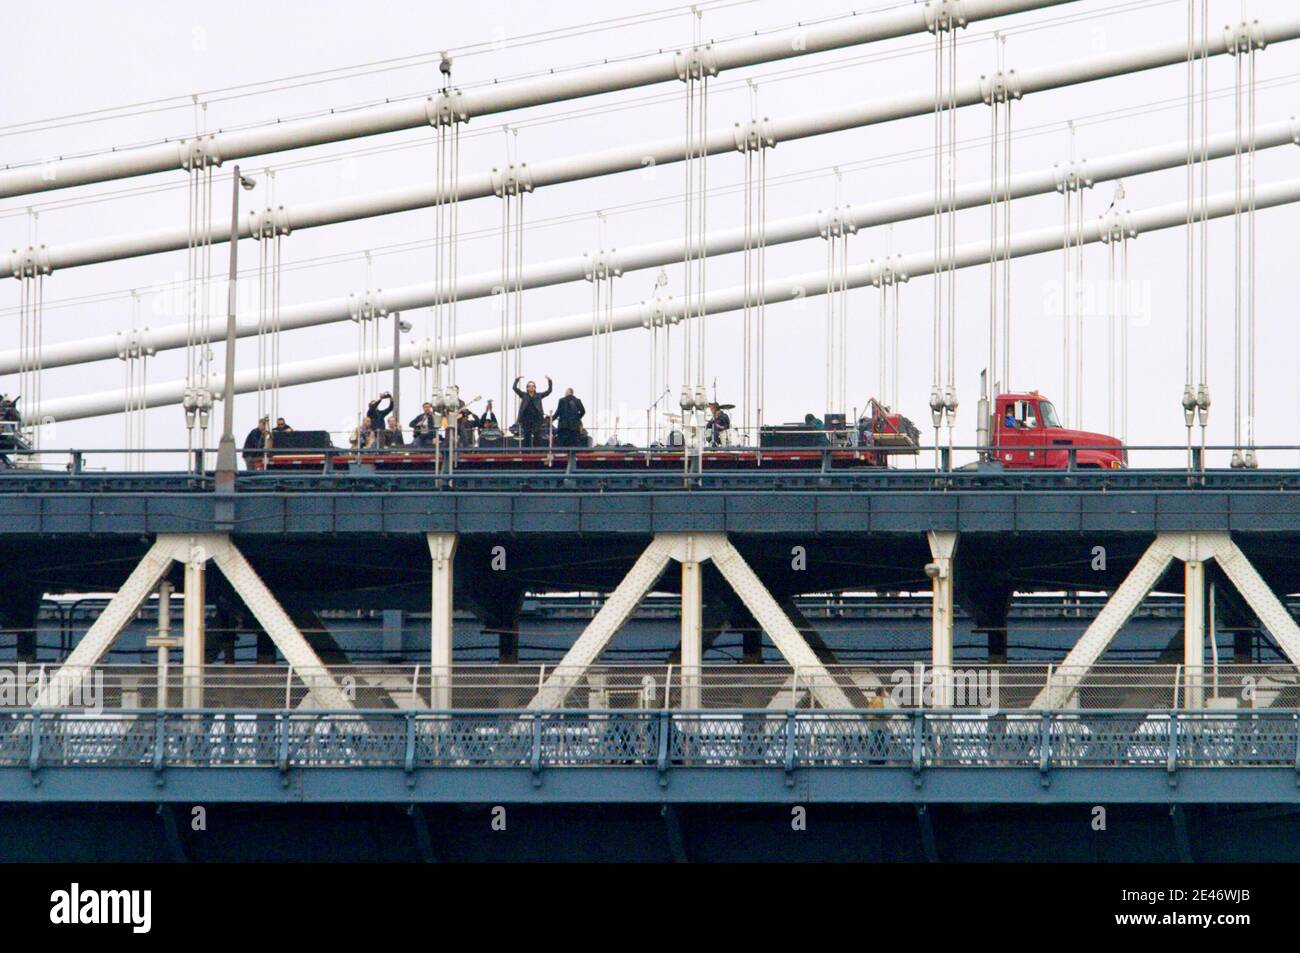 U2 performing on a flatbed truck while on the Manhattan Bridge in NYC. Stock Photo